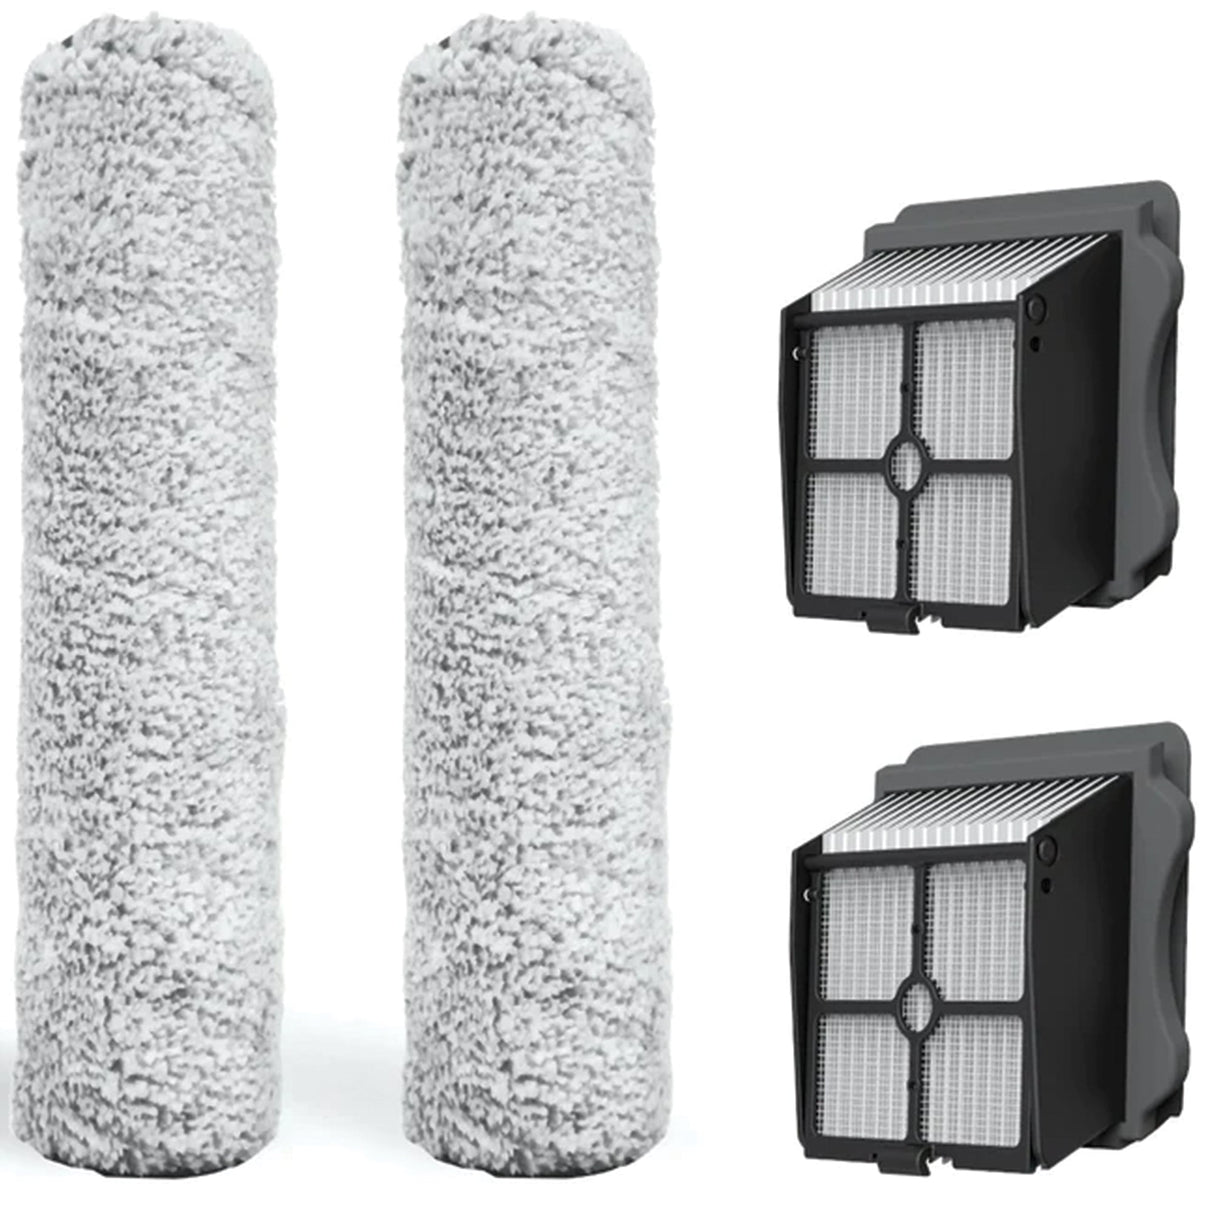 Tineco iFLOOR 3/Breeze Replacement 2xHEPA Filter Assembly, 2xBrush Roller - UNBOXED DEAL